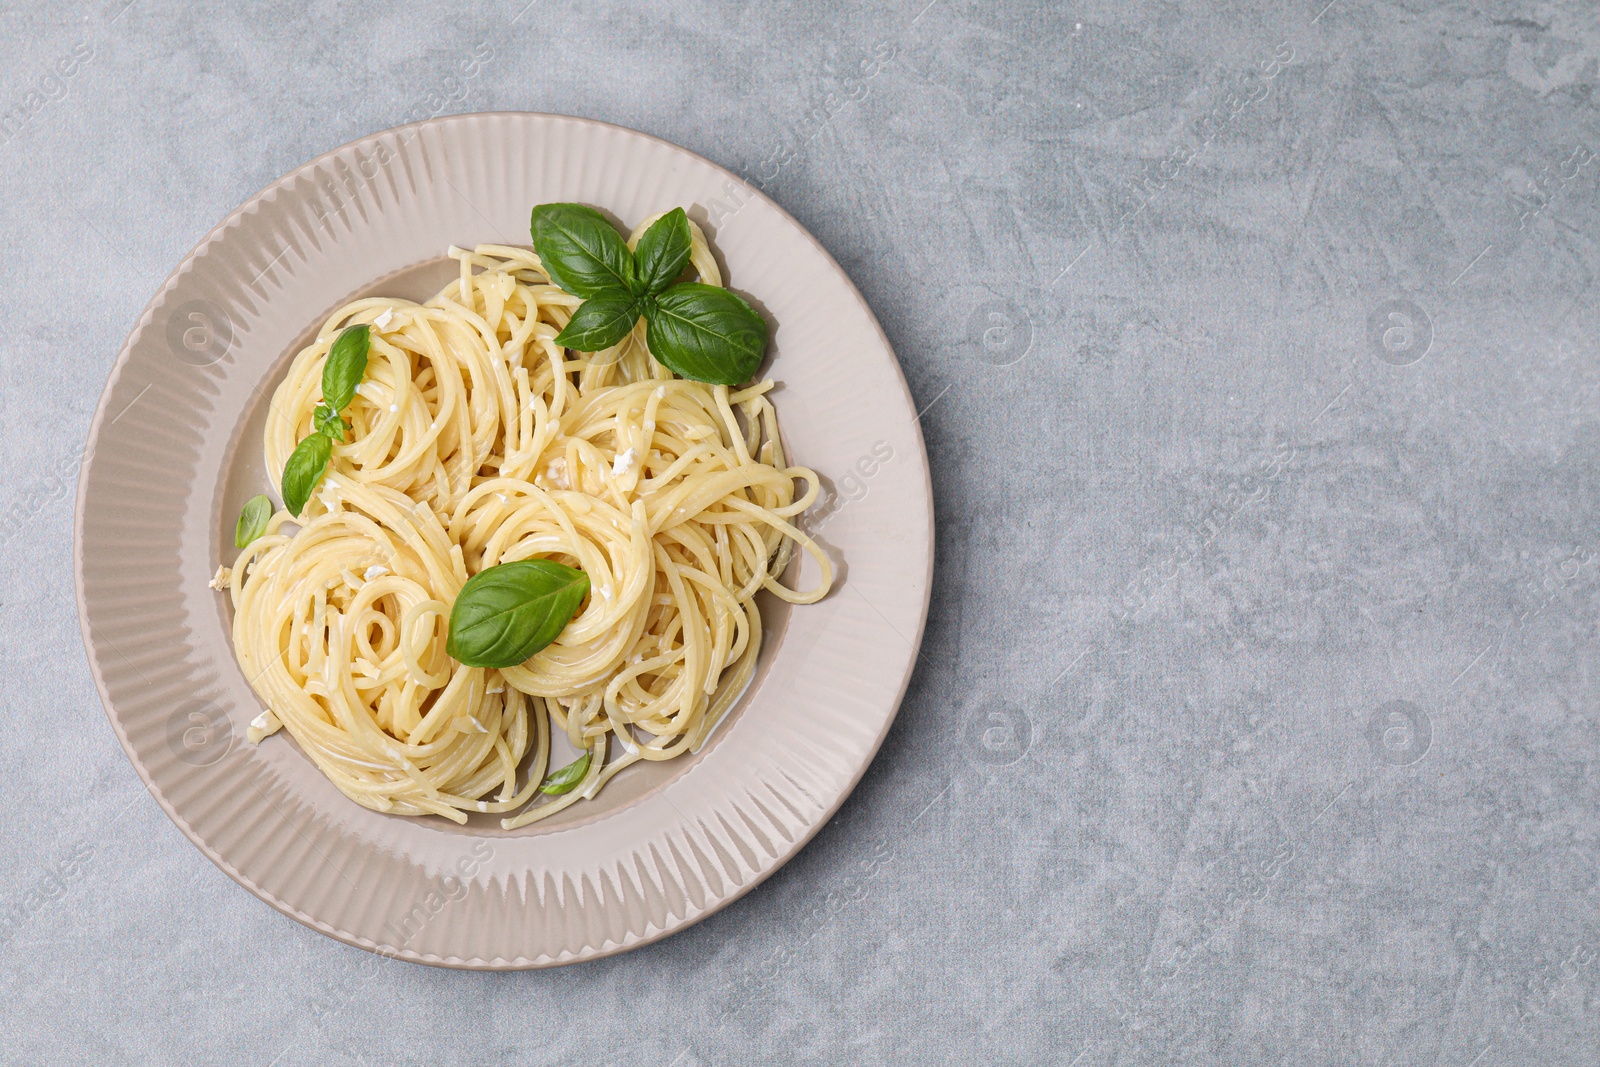 Photo of Delicious pasta with brie cheese and basil leaves on grey textured table, top view. Space for text